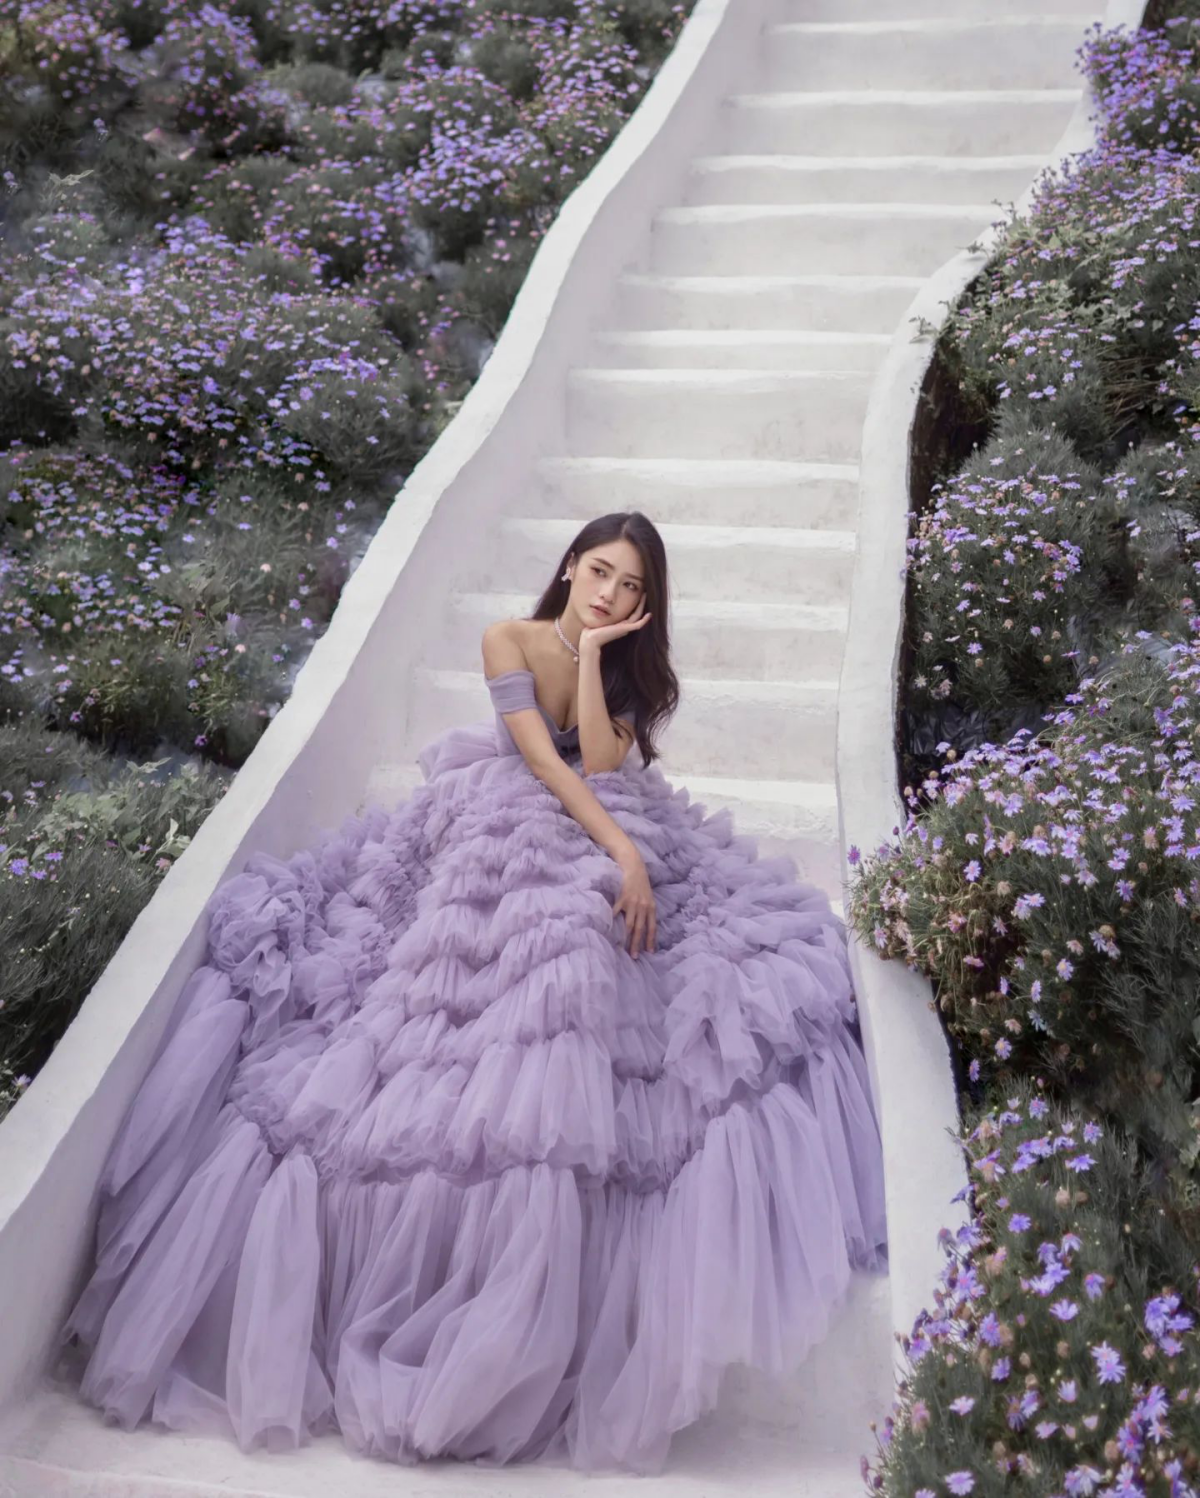 Ladies, would you like to wear a purple wedding dress? - Quora